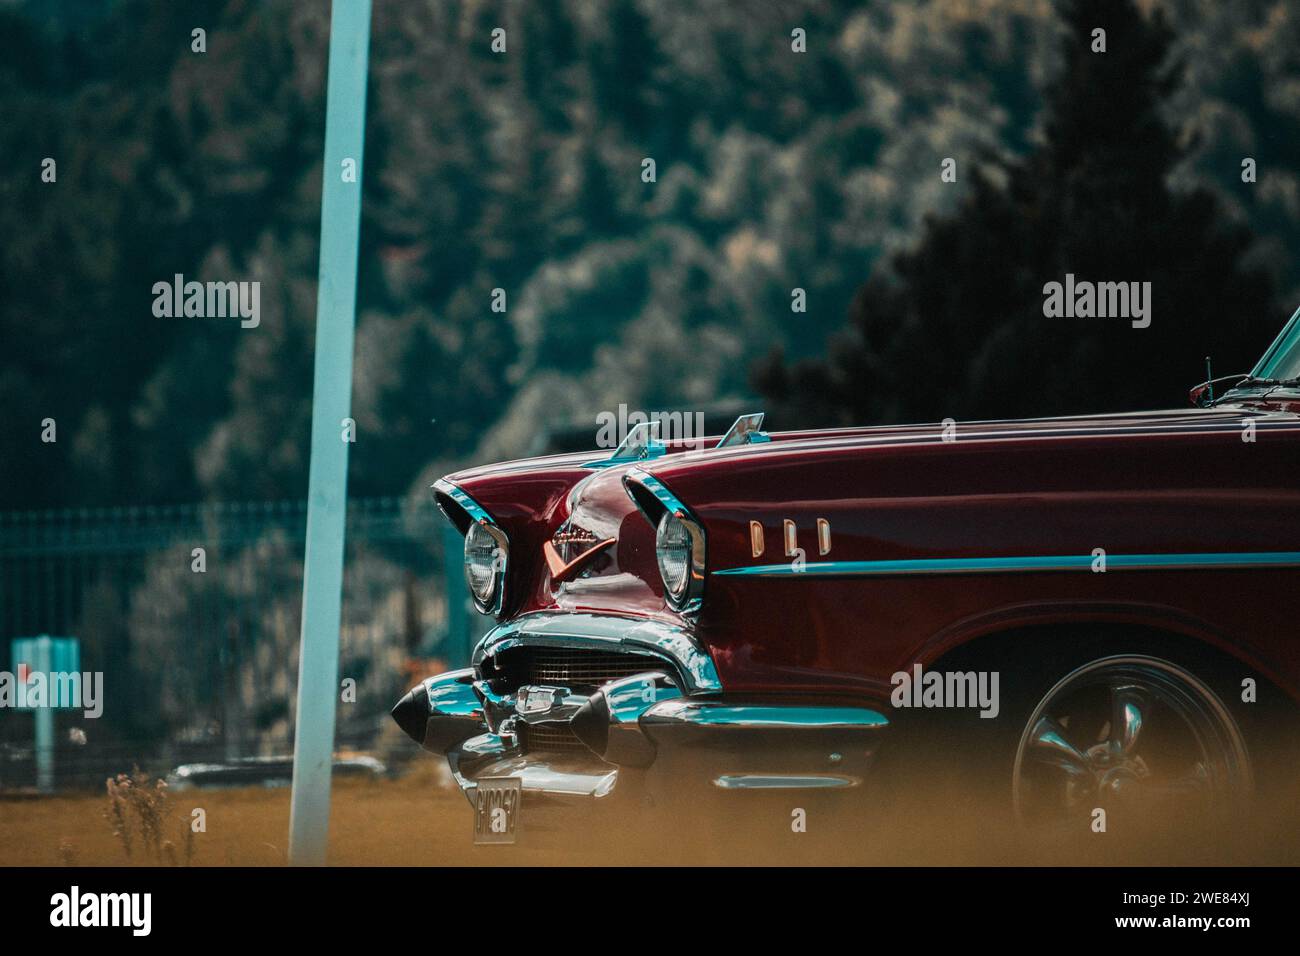 Moody shot of the front of a maroon colored classic car coming around the corner. Stock Photo